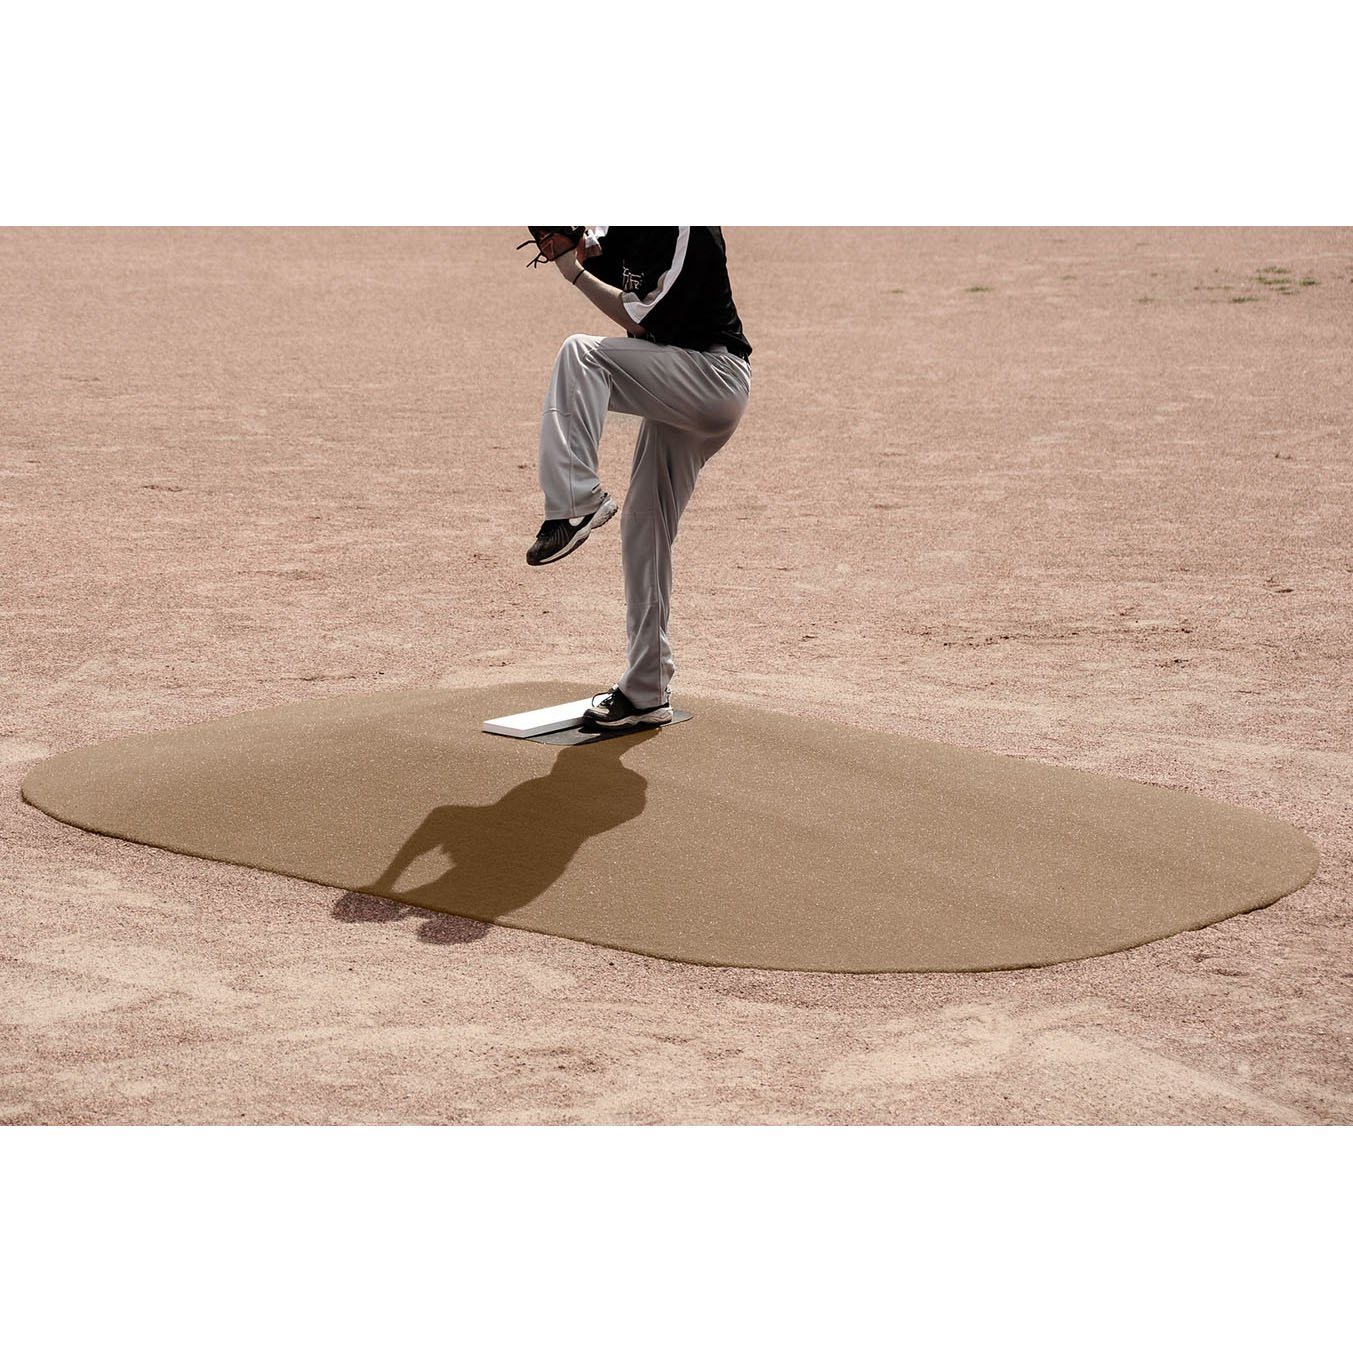 Pitch Pro 8121 Portable Adult Game Pitching Mound